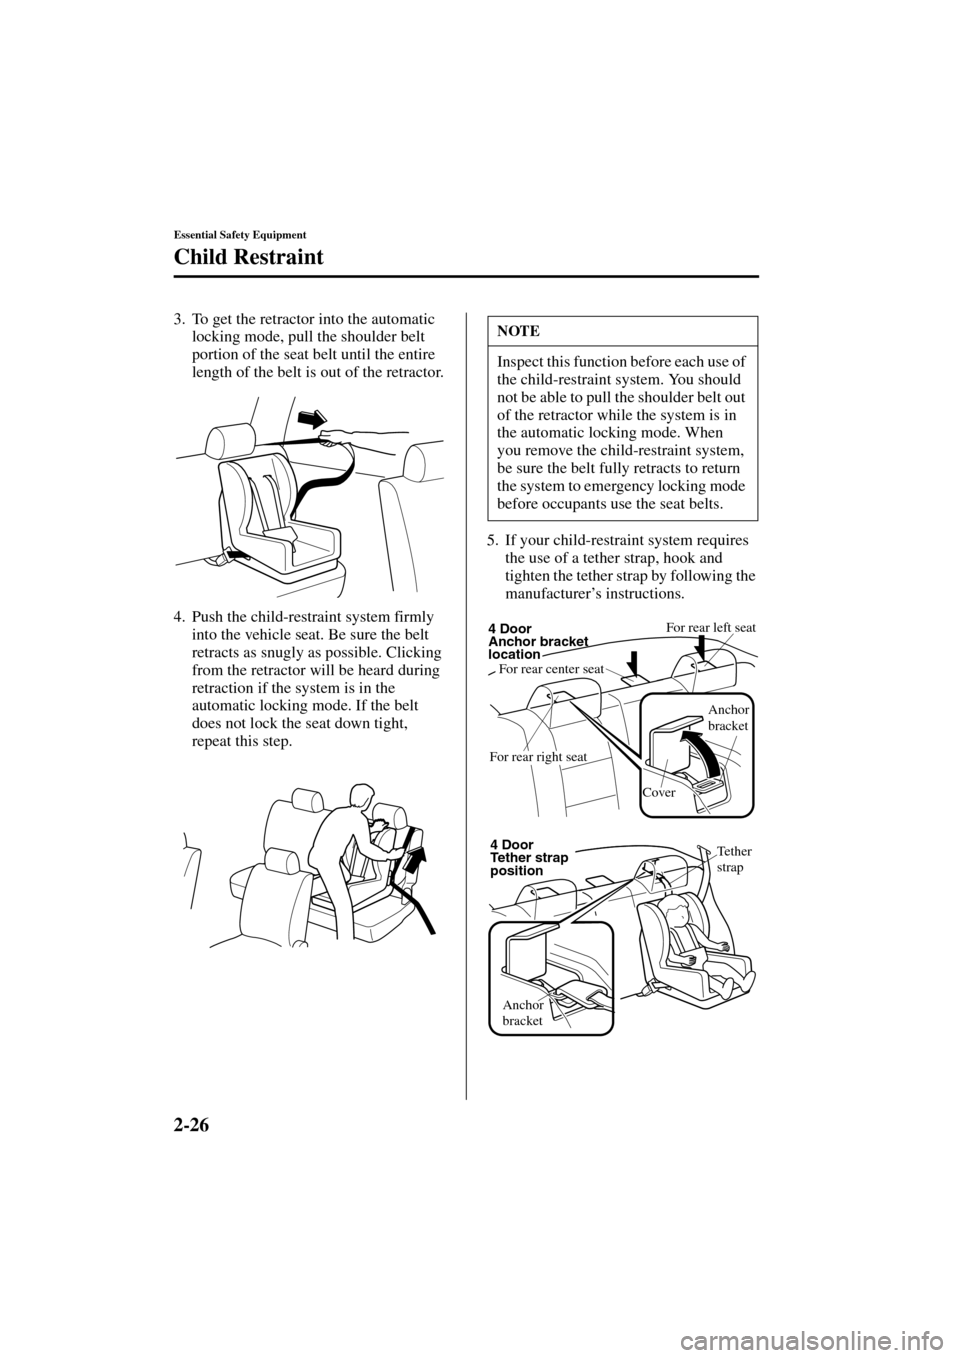 MAZDA MODEL 3 HATCHBACK 2004  Owners Manual (in English) 2-26
Essential Safety Equipment
Child Restraint
Form No. 8S18-EA-03I
3. To get the retractor into the automatic 
locking mode, pull the shoulder belt 
portion of the seat belt until the entire 
length